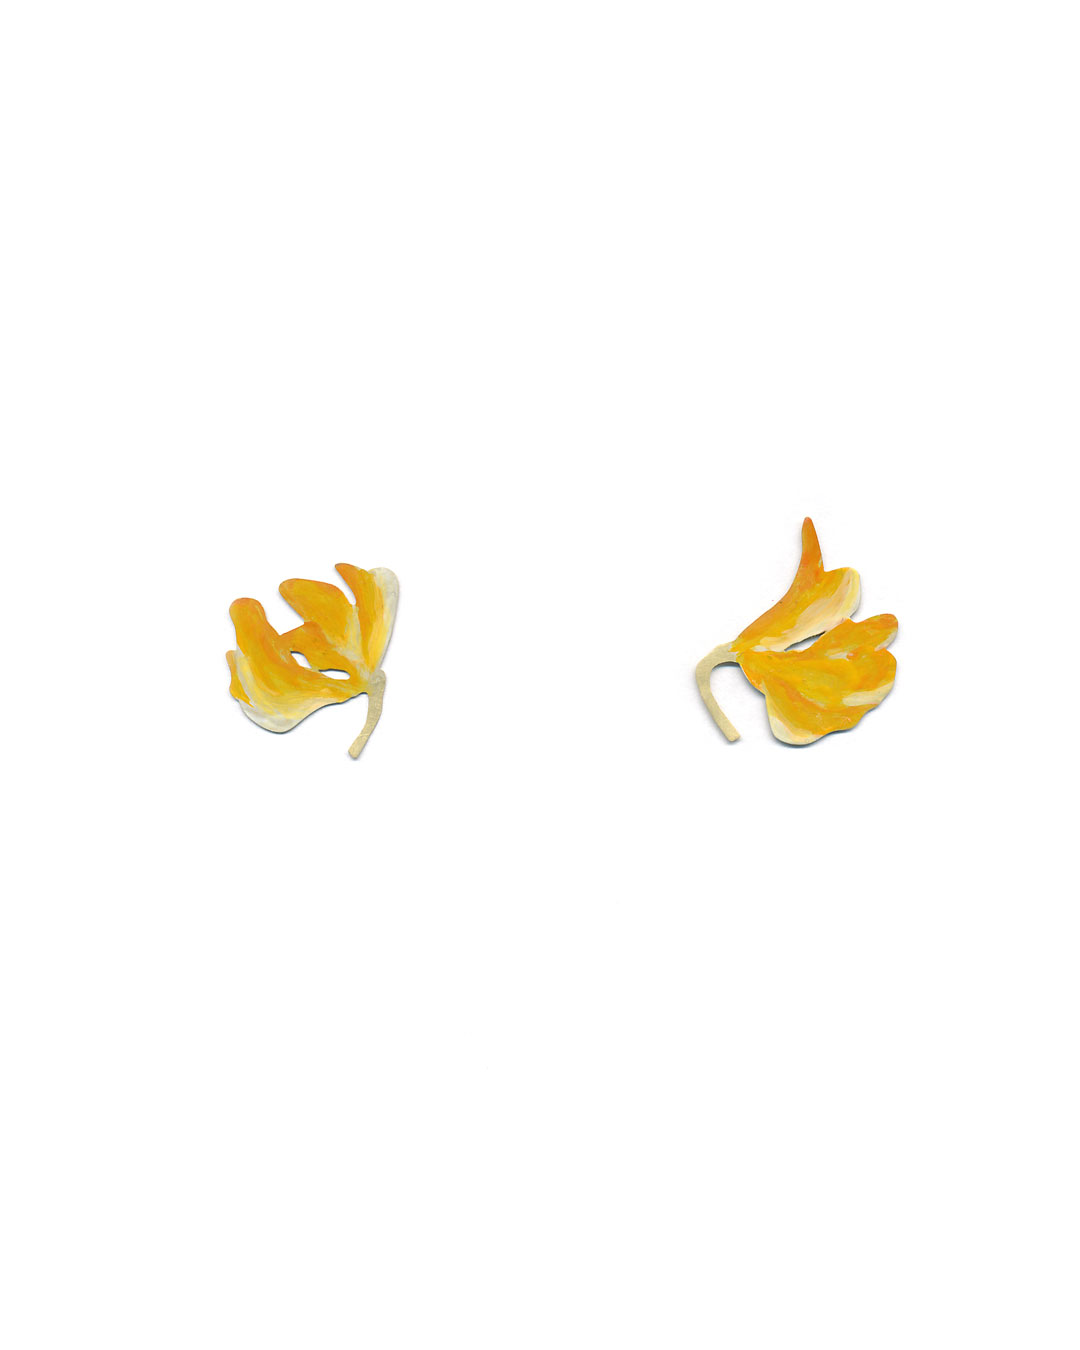 Christopher Thompson Royds, Natura Morta: Meadow Vetch, 2016, stud earrings; 18ct gold, hand-painted, 20 x 21 mm, €750